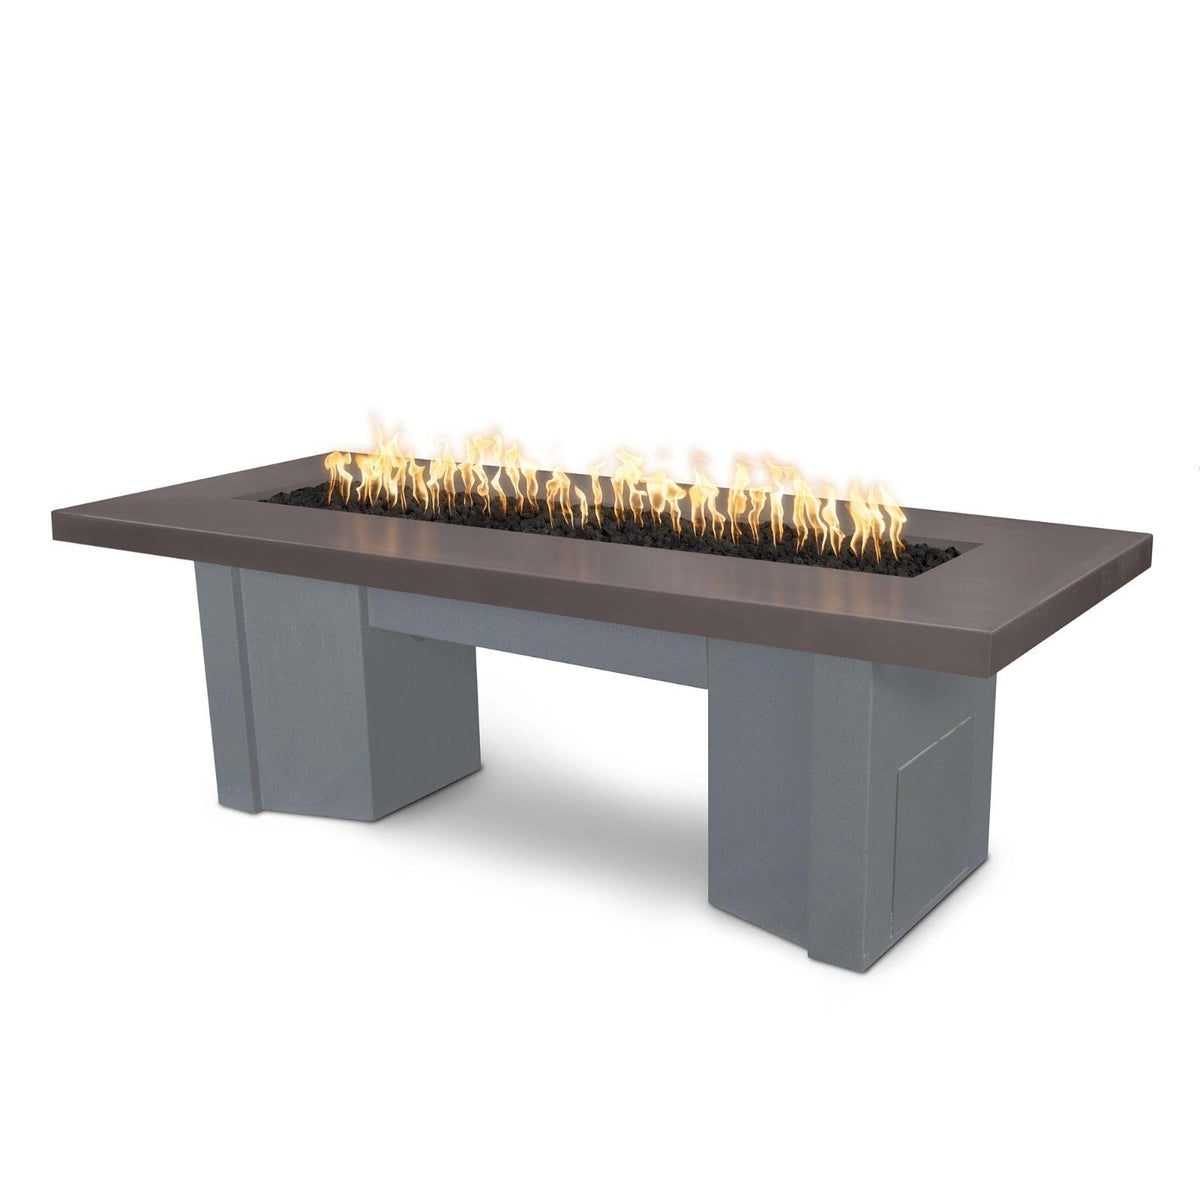 The Outdoor Plus Fire Features Chestnut (-CST) / Gray Powder Coated Steel (-GRY) The Outdoor Plus 60&quot; Alameda Fire Table Smooth Concrete in Natural Gas - Flame Sense System with Push Button Spark Igniter / OPT-ALMGFRC60FSEN-NG